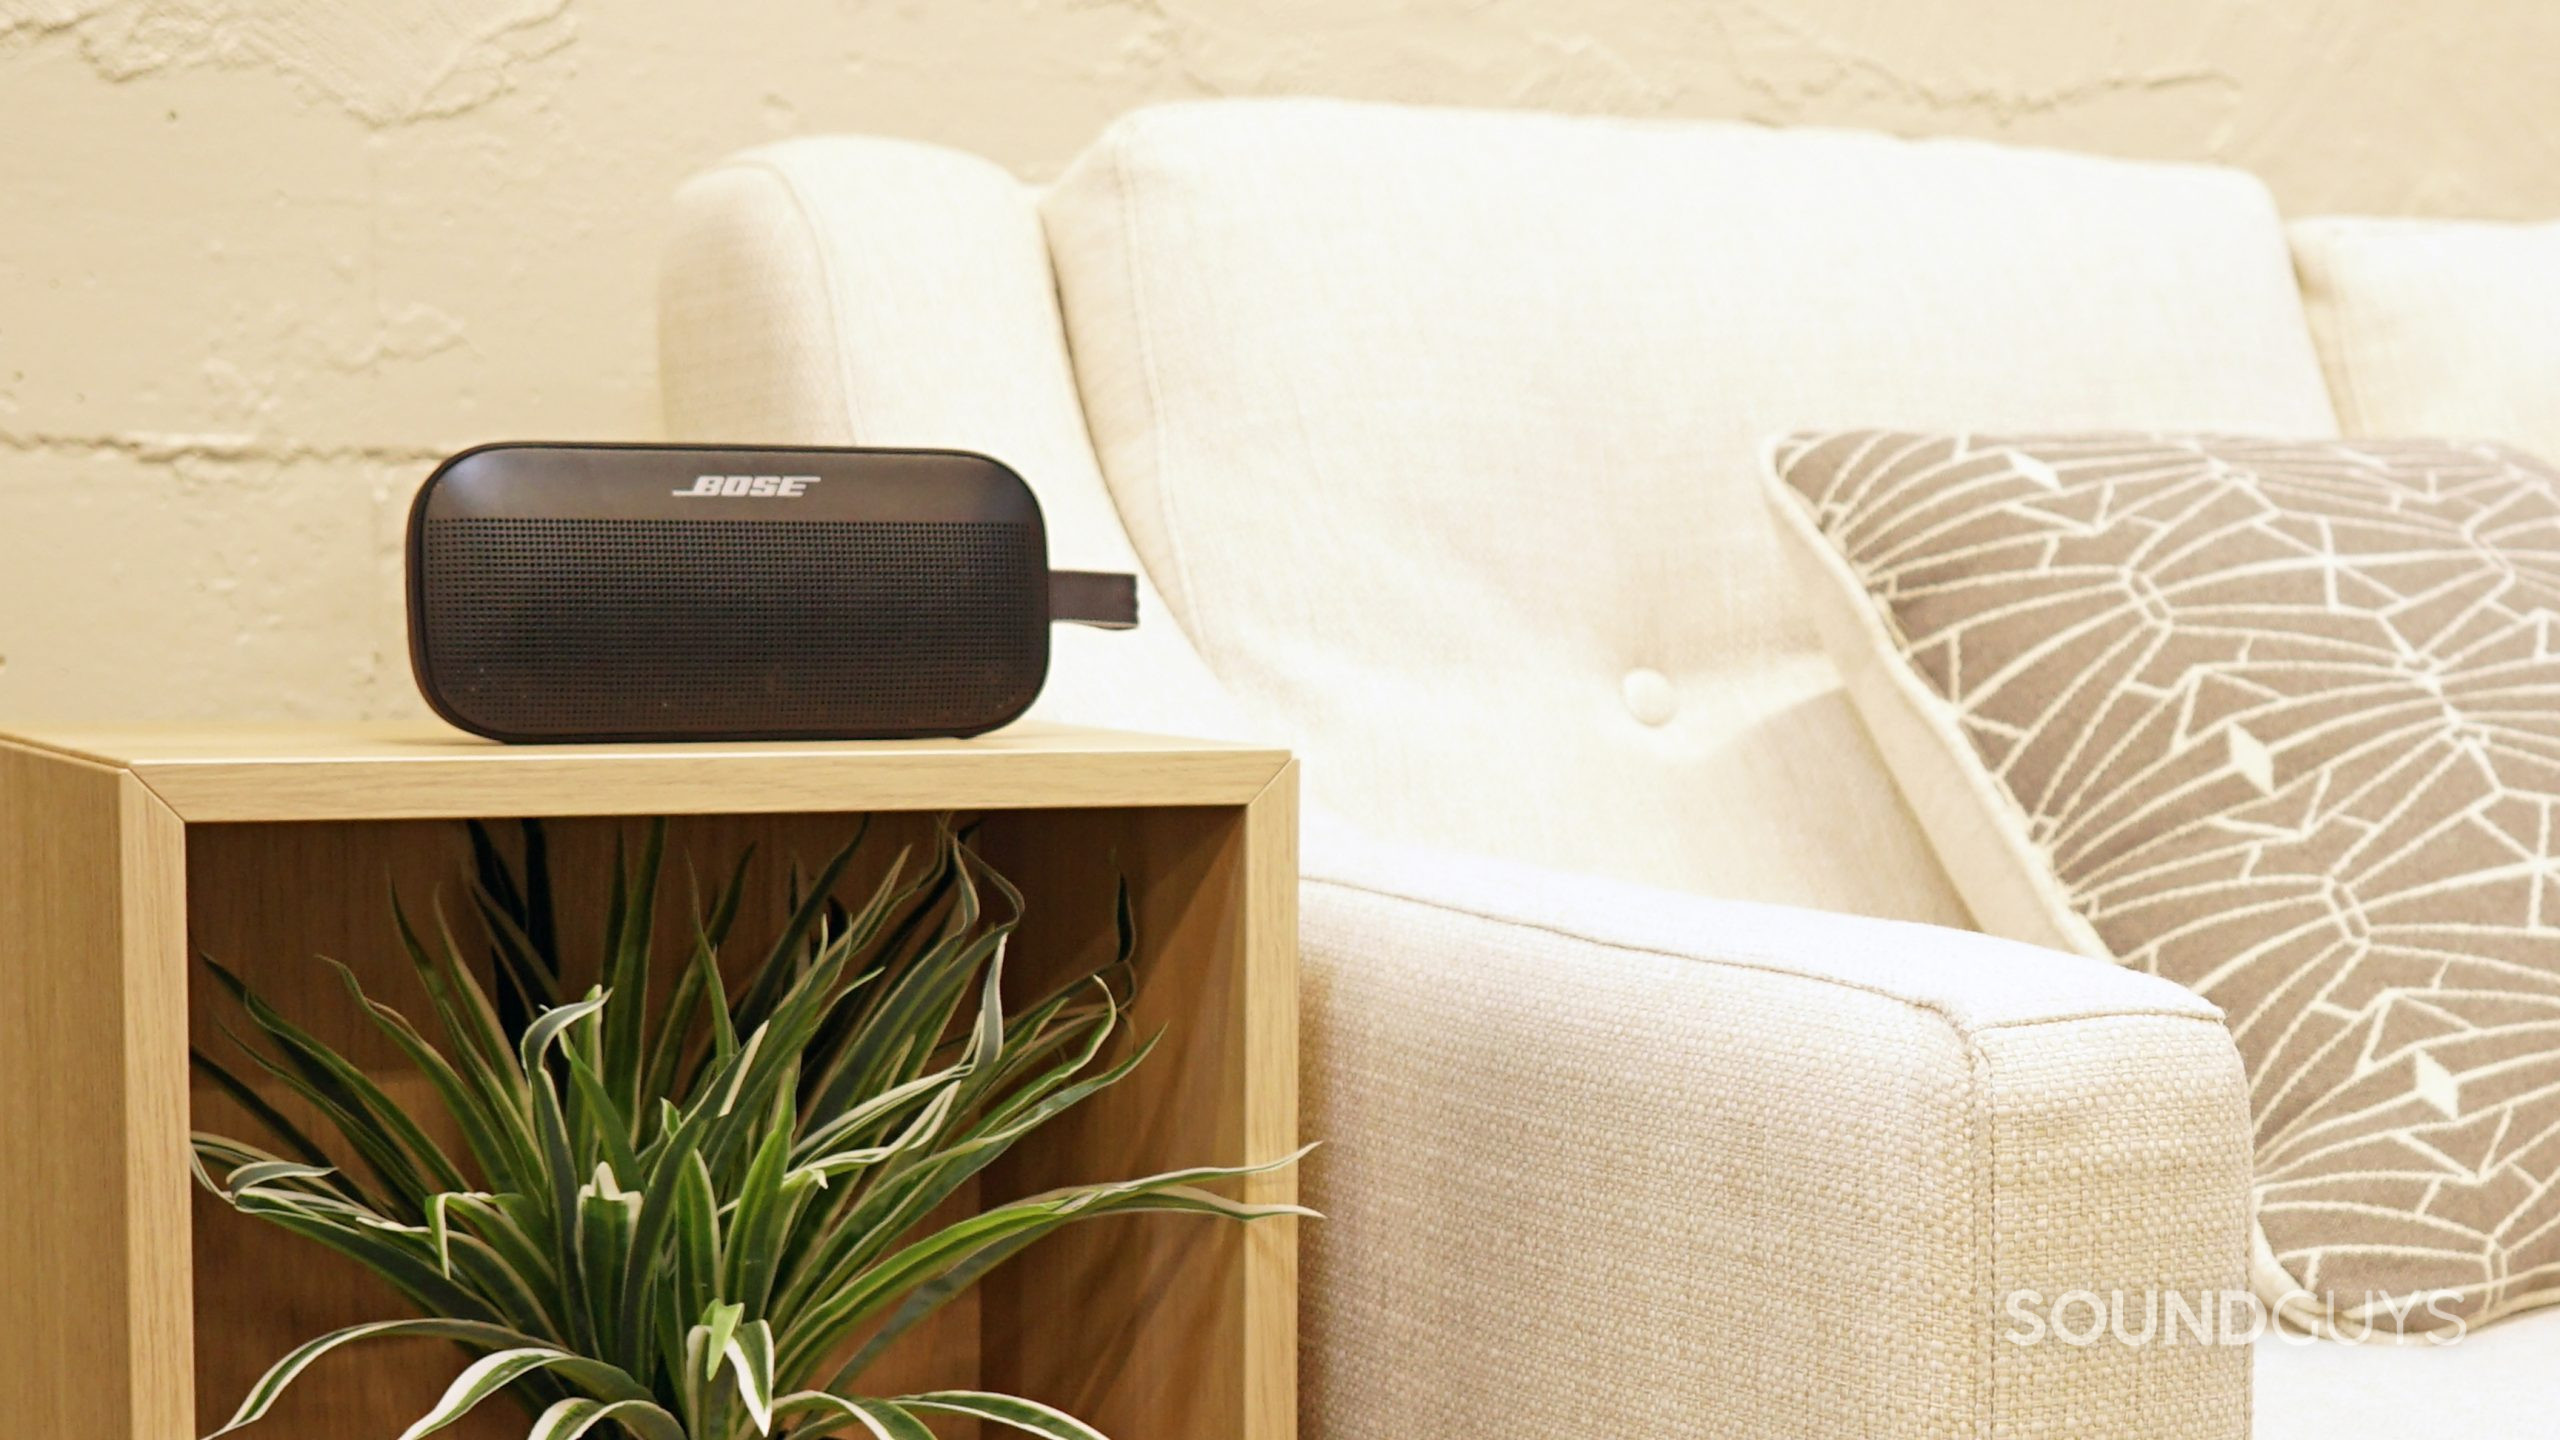 The Bose SoundLink Flex Bluetooth speaker sitting on a wooden box above a plant next to a white sofa.